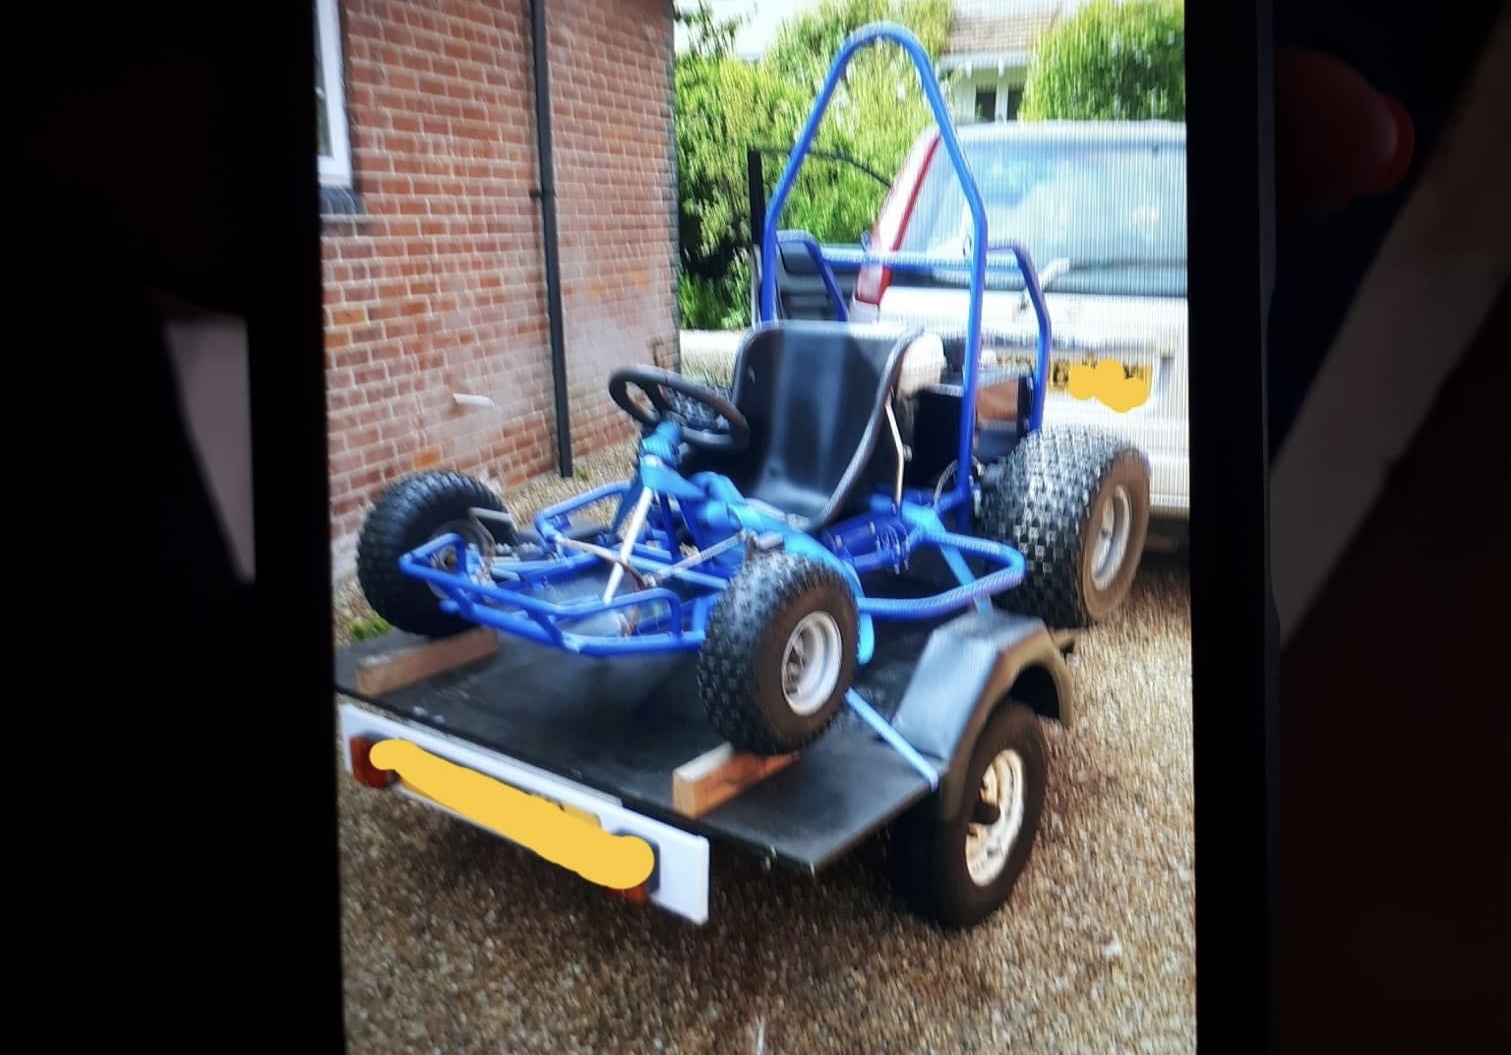 NEWS | Police appeal after vehicle was stolen from Kingstone